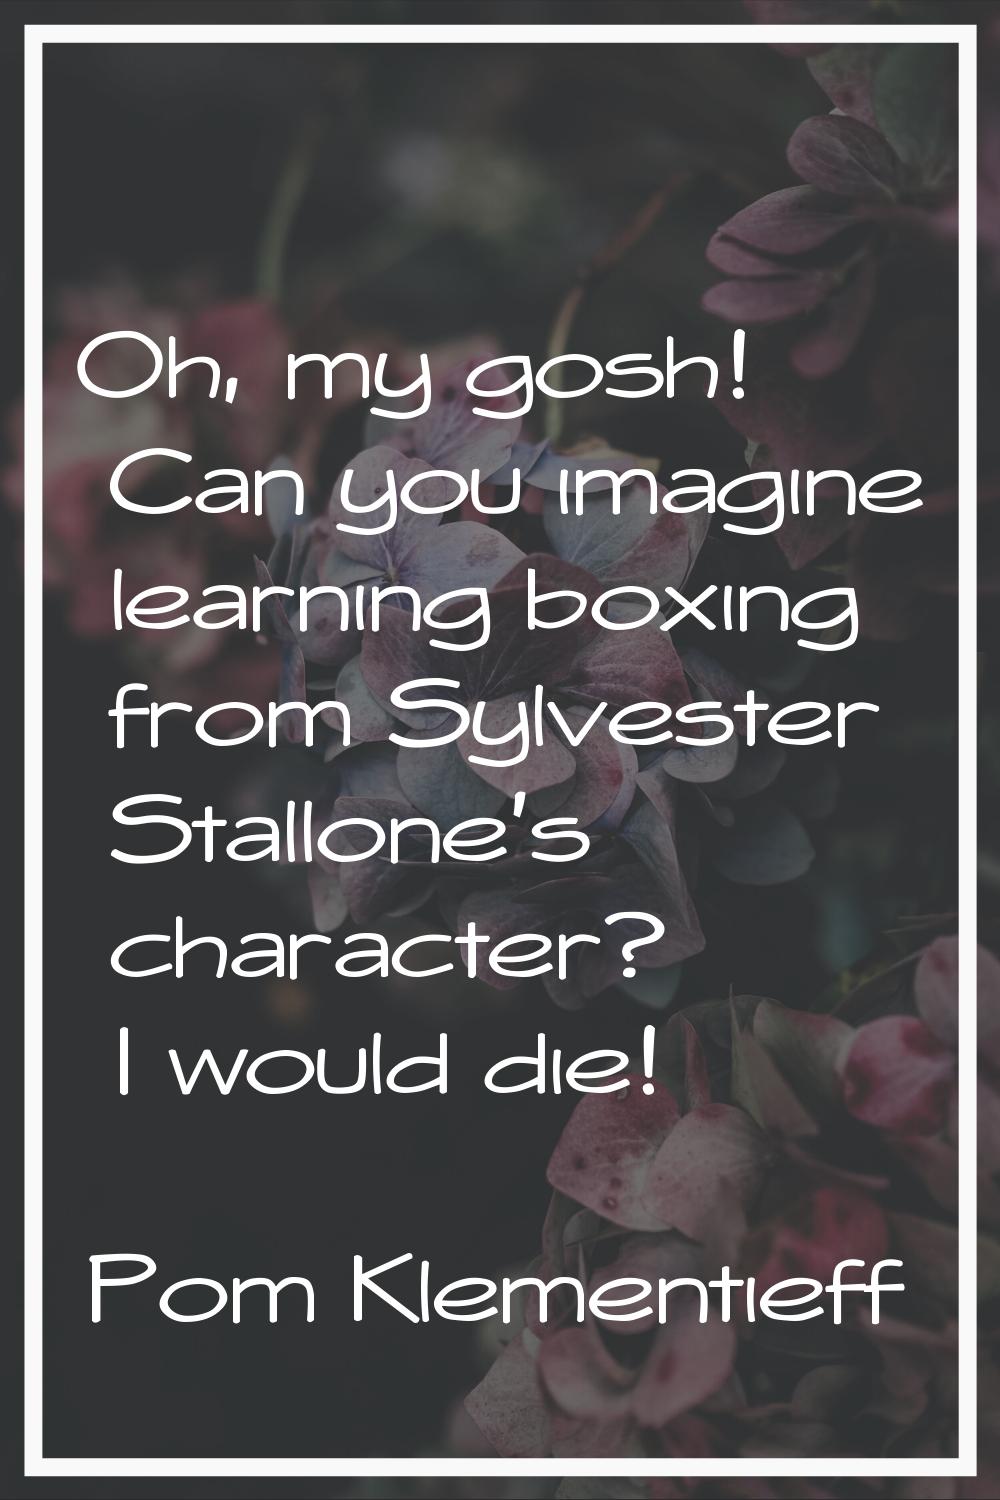 Oh, my gosh! Can you imagine learning boxing from Sylvester Stallone's character? I would die!